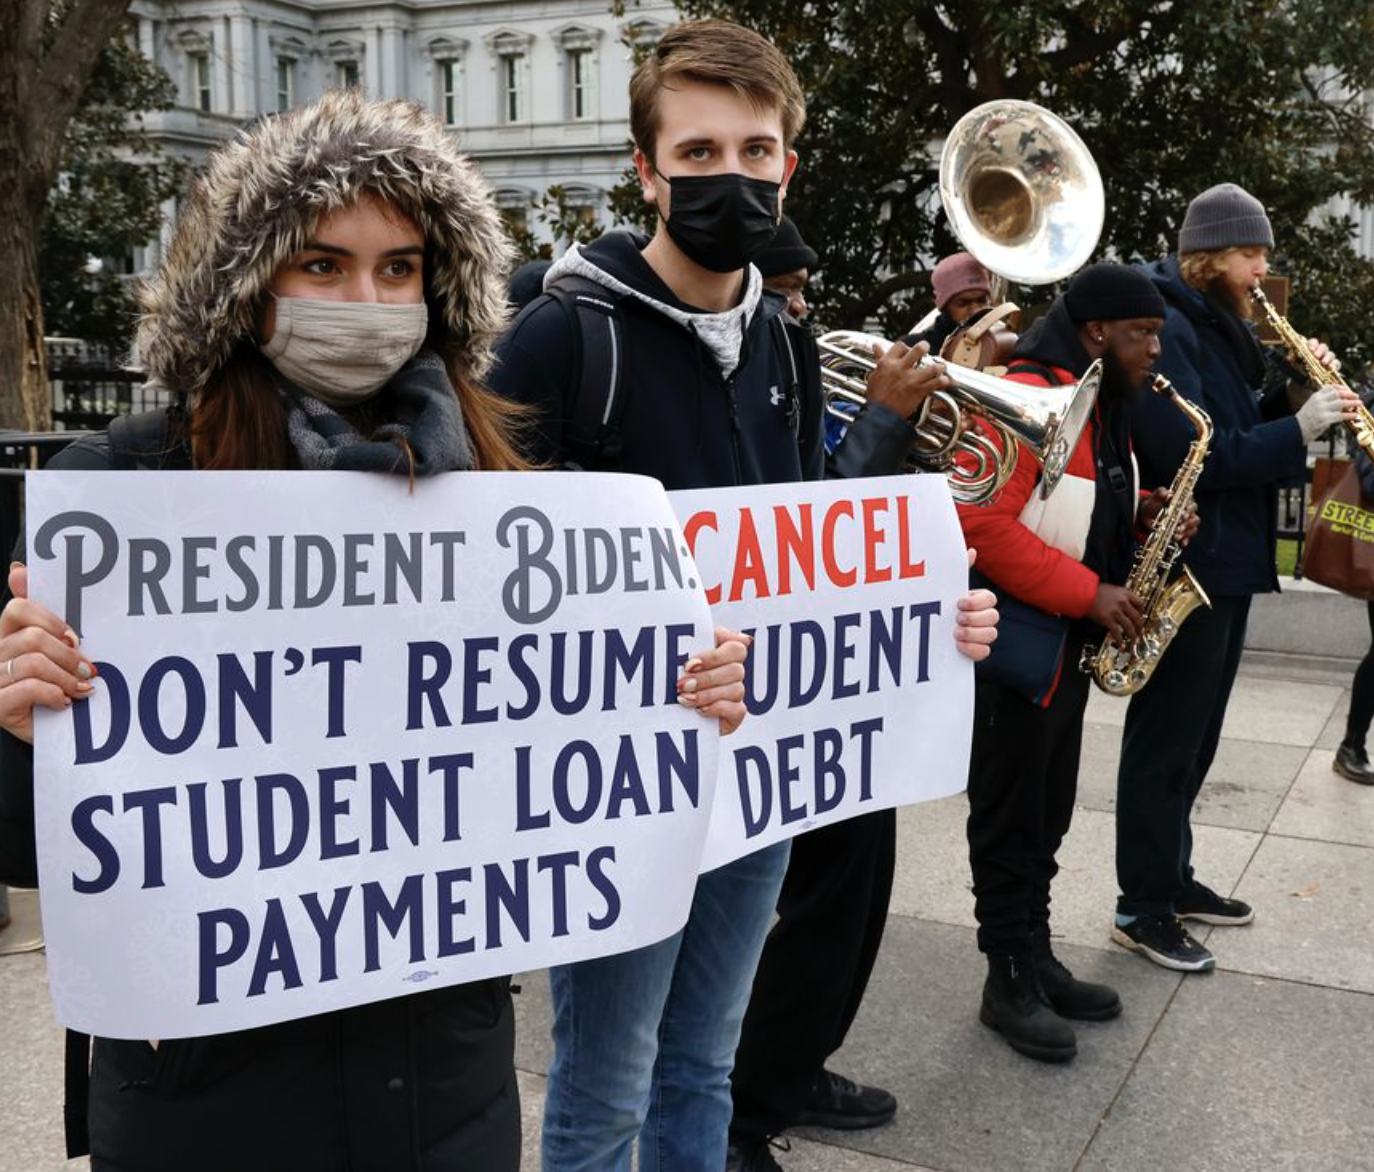 Students protest - cancel student debt